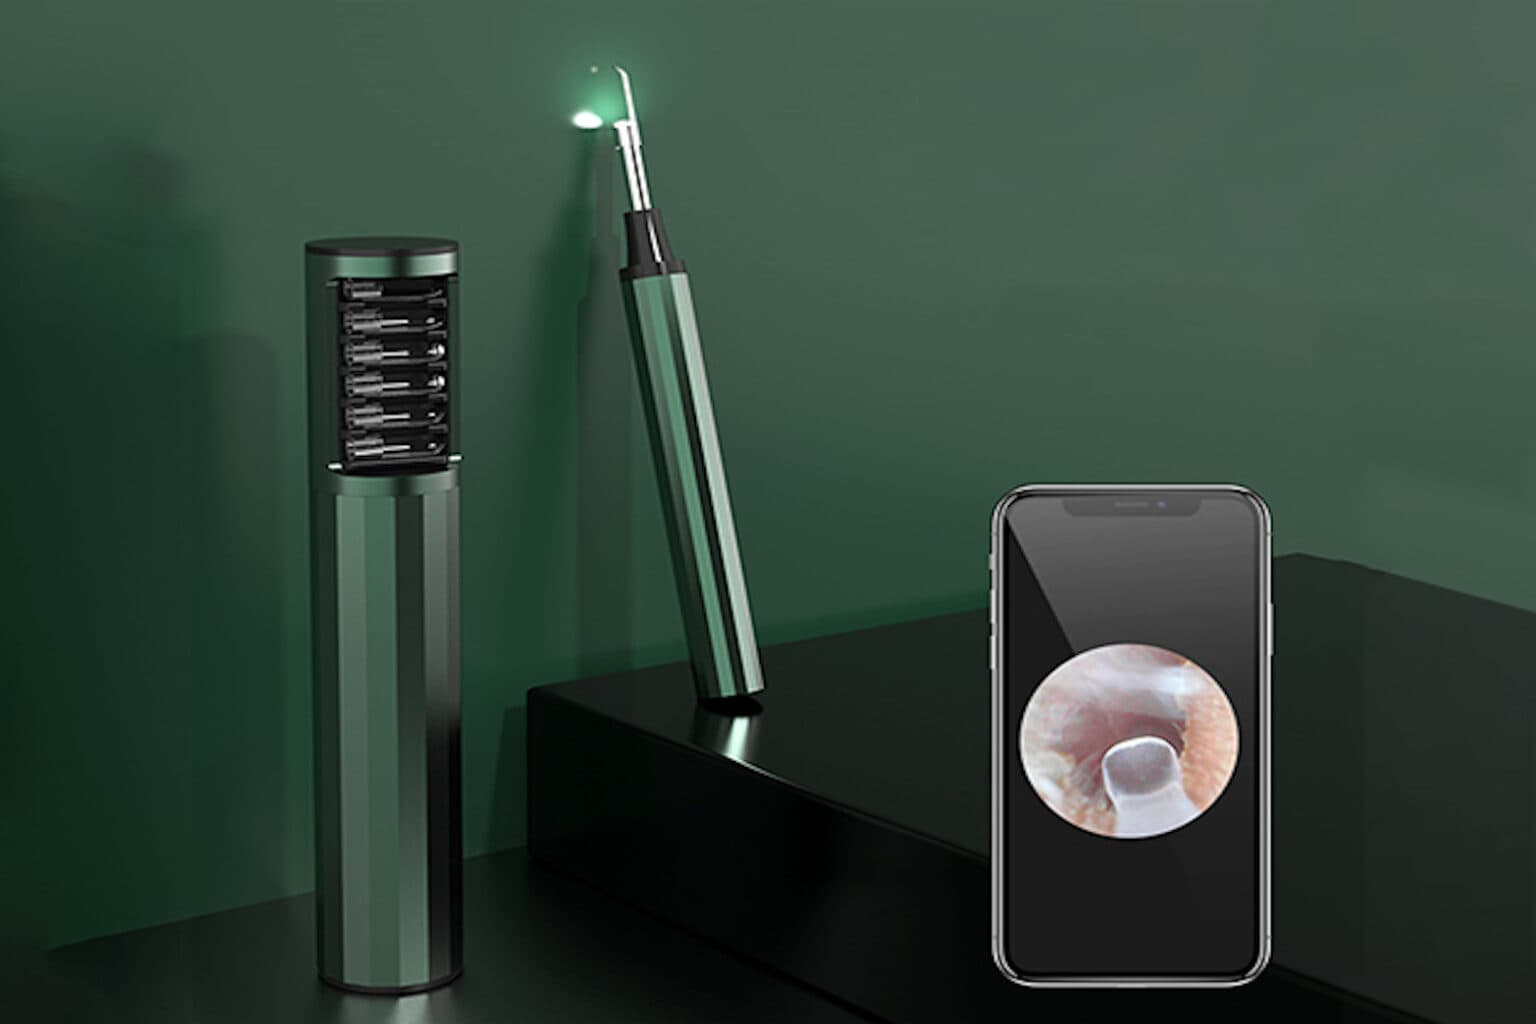 Get a view of your ear canal with this $34.99 smart cleaner.